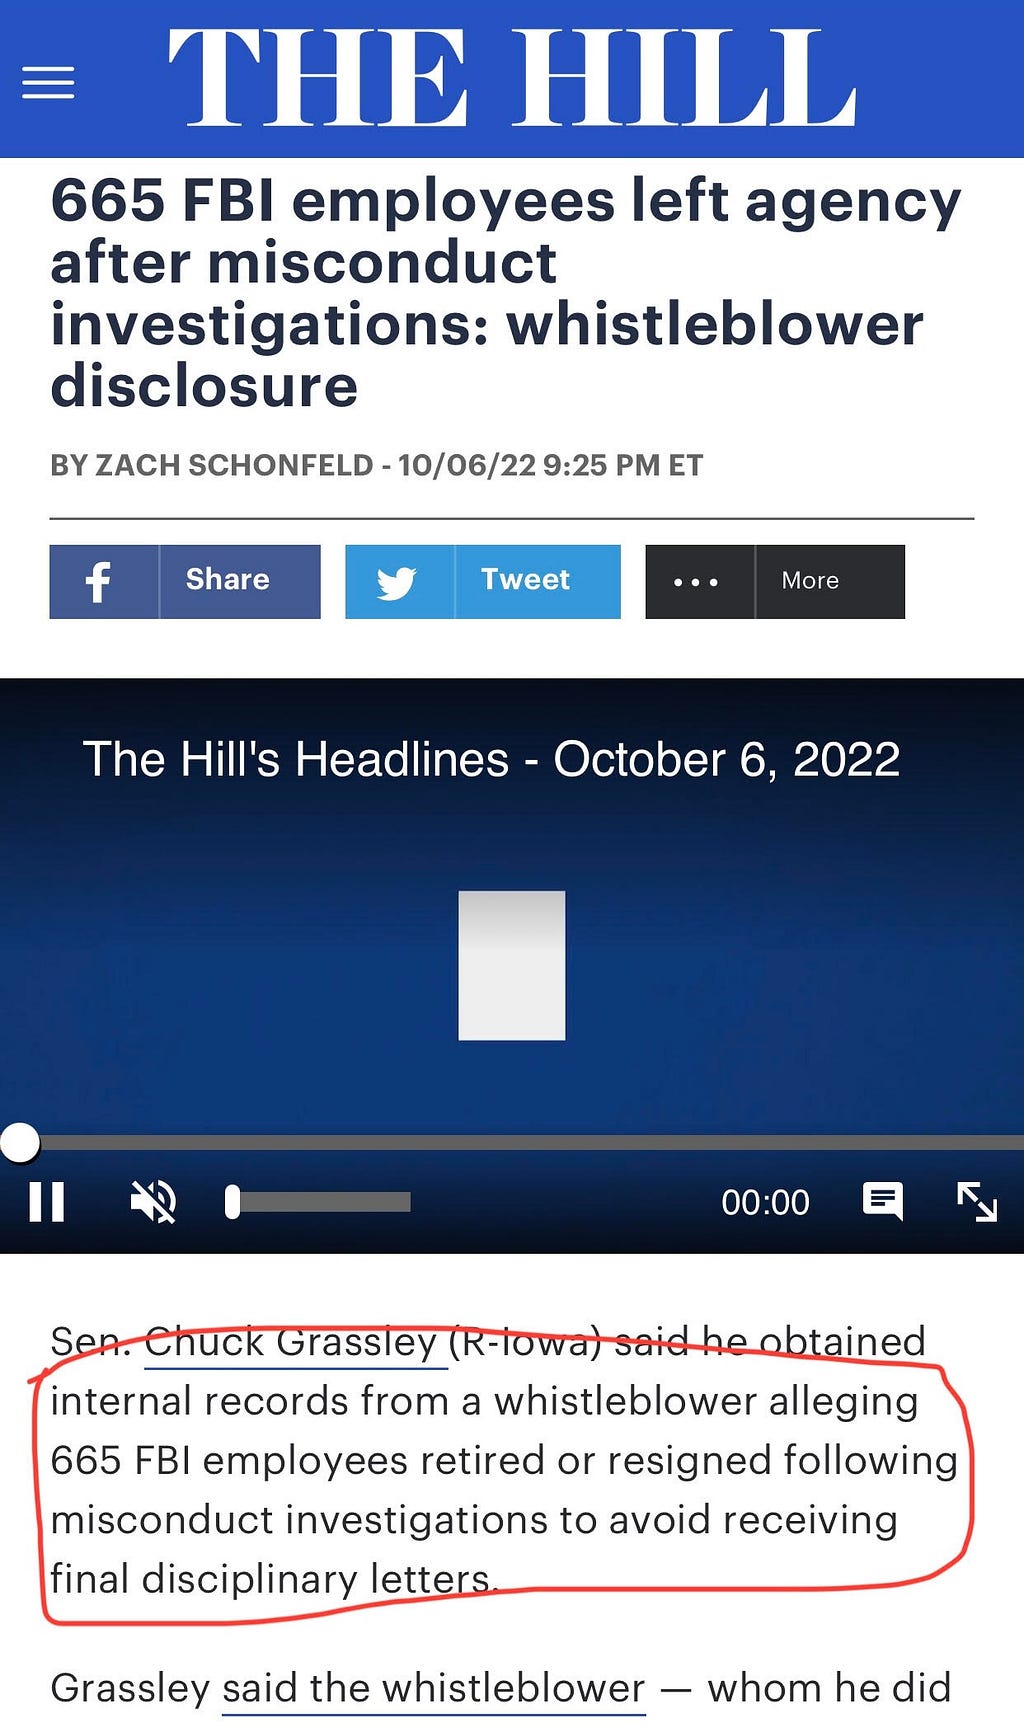 An image of the headline and masthead of The Hill with the story referenced.